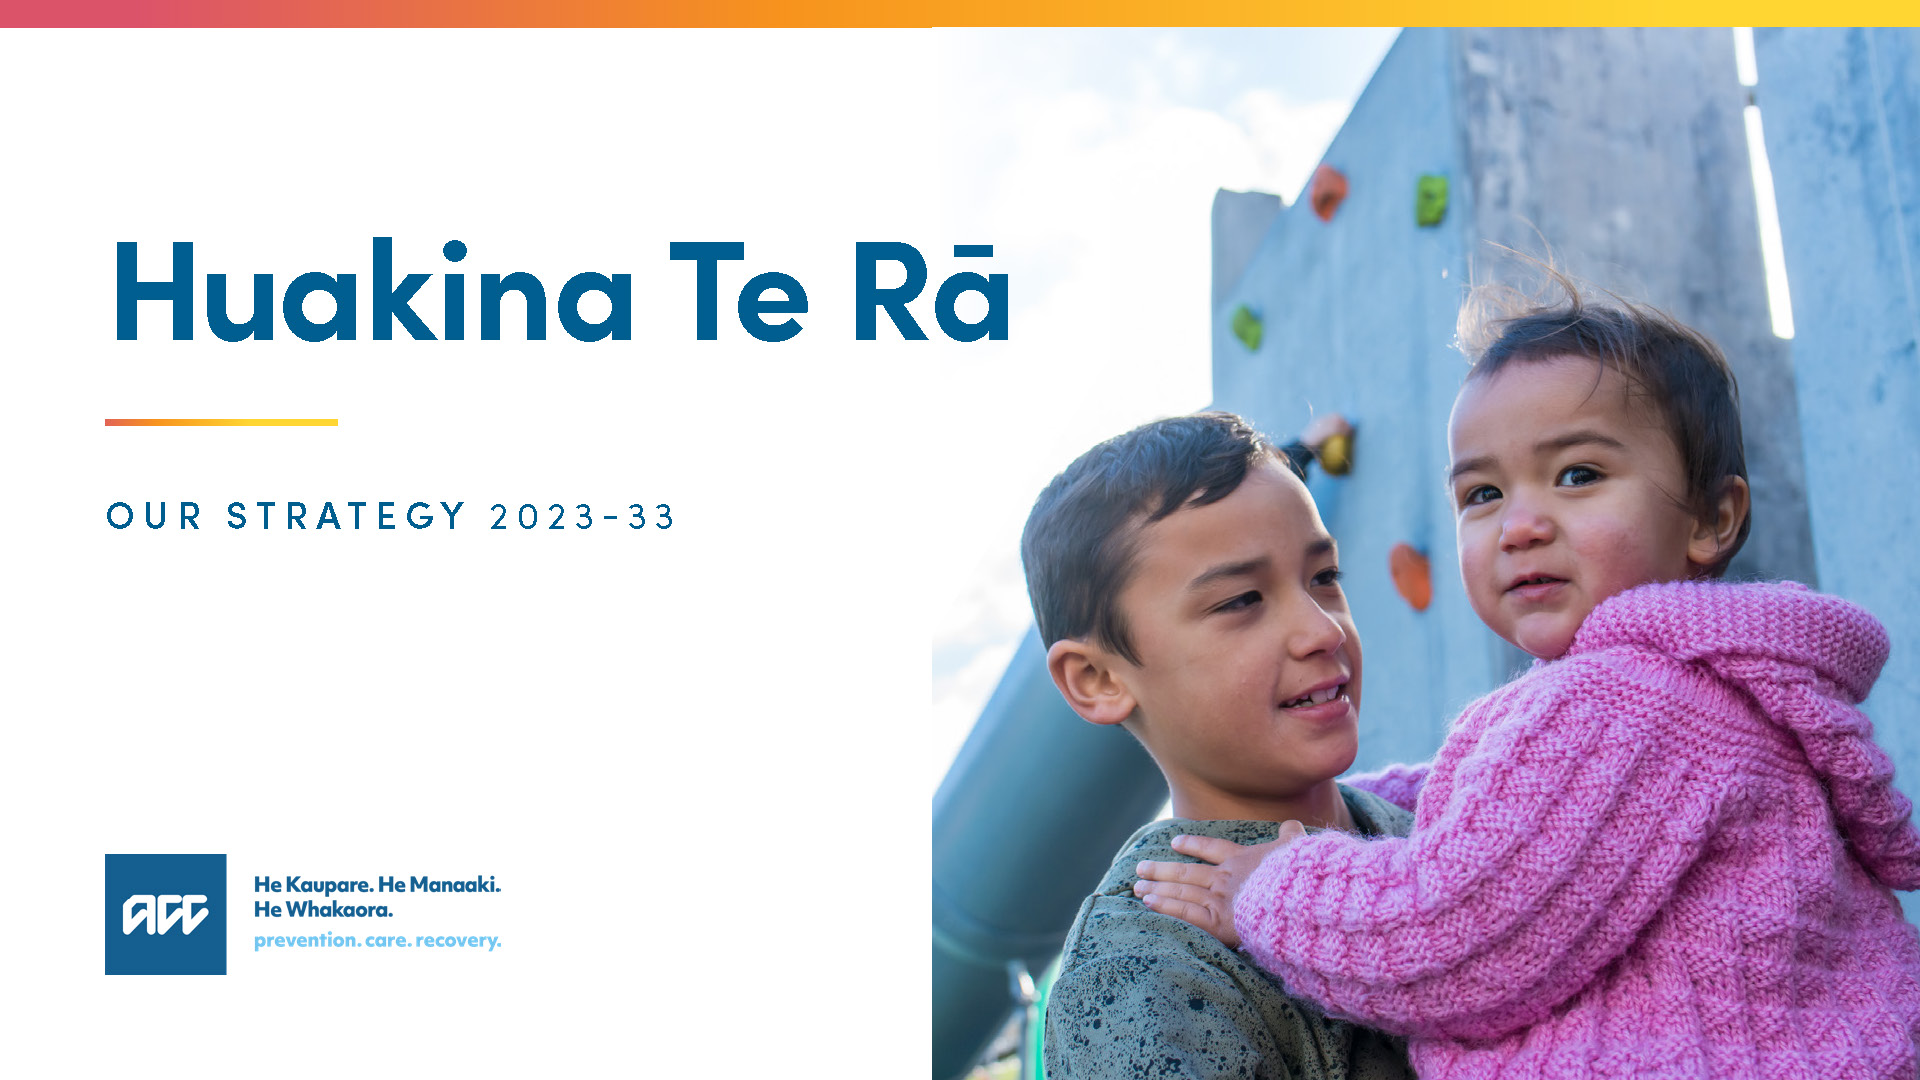 Young child holding toddler sibling with text Huakina Te Rā